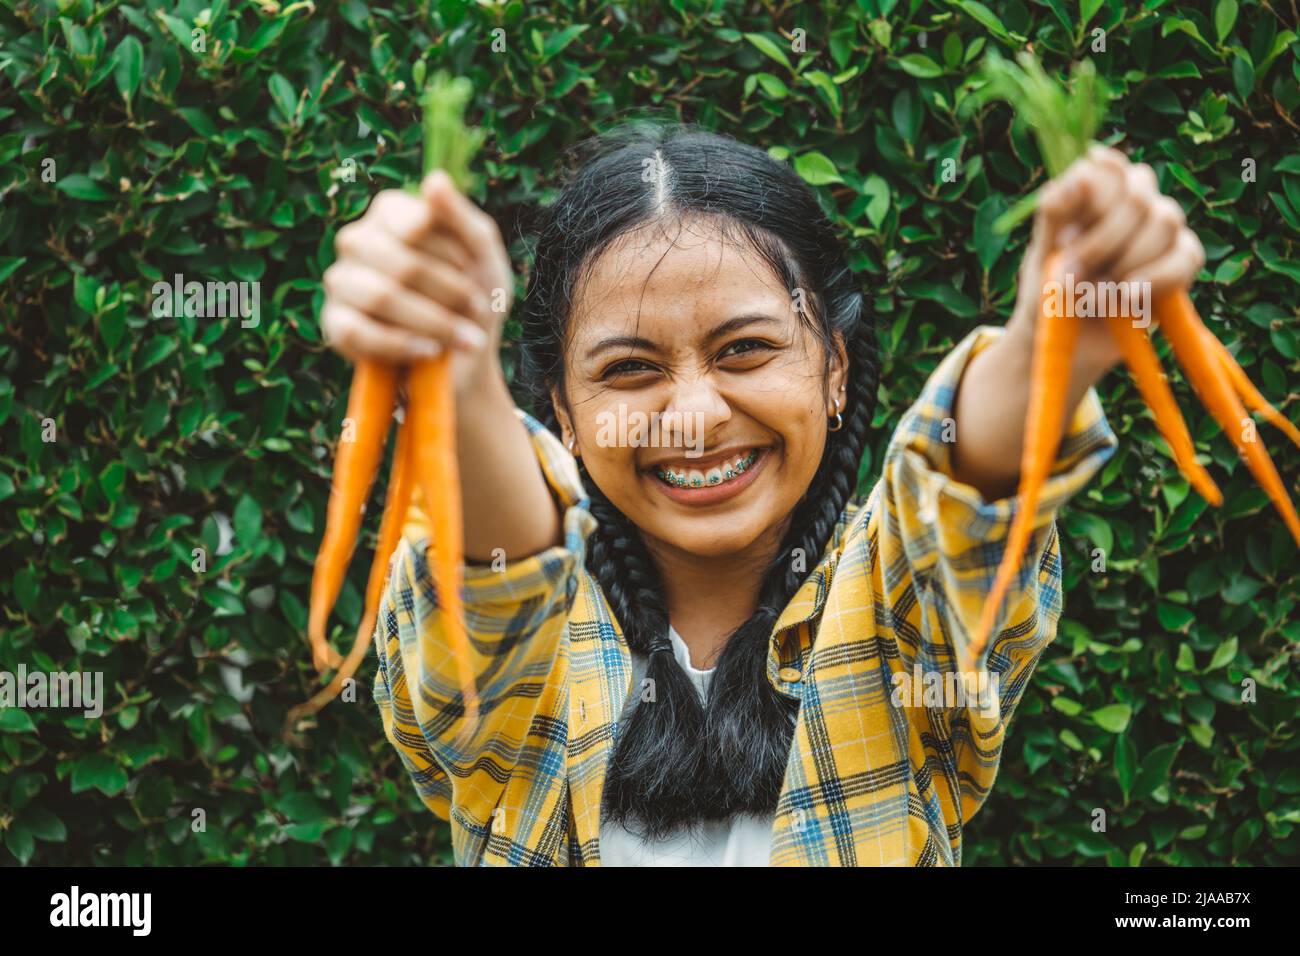 eating vegan vegetable for healthy good for life concept. young teen hand holding baby carrot happy smile. Stock Photo